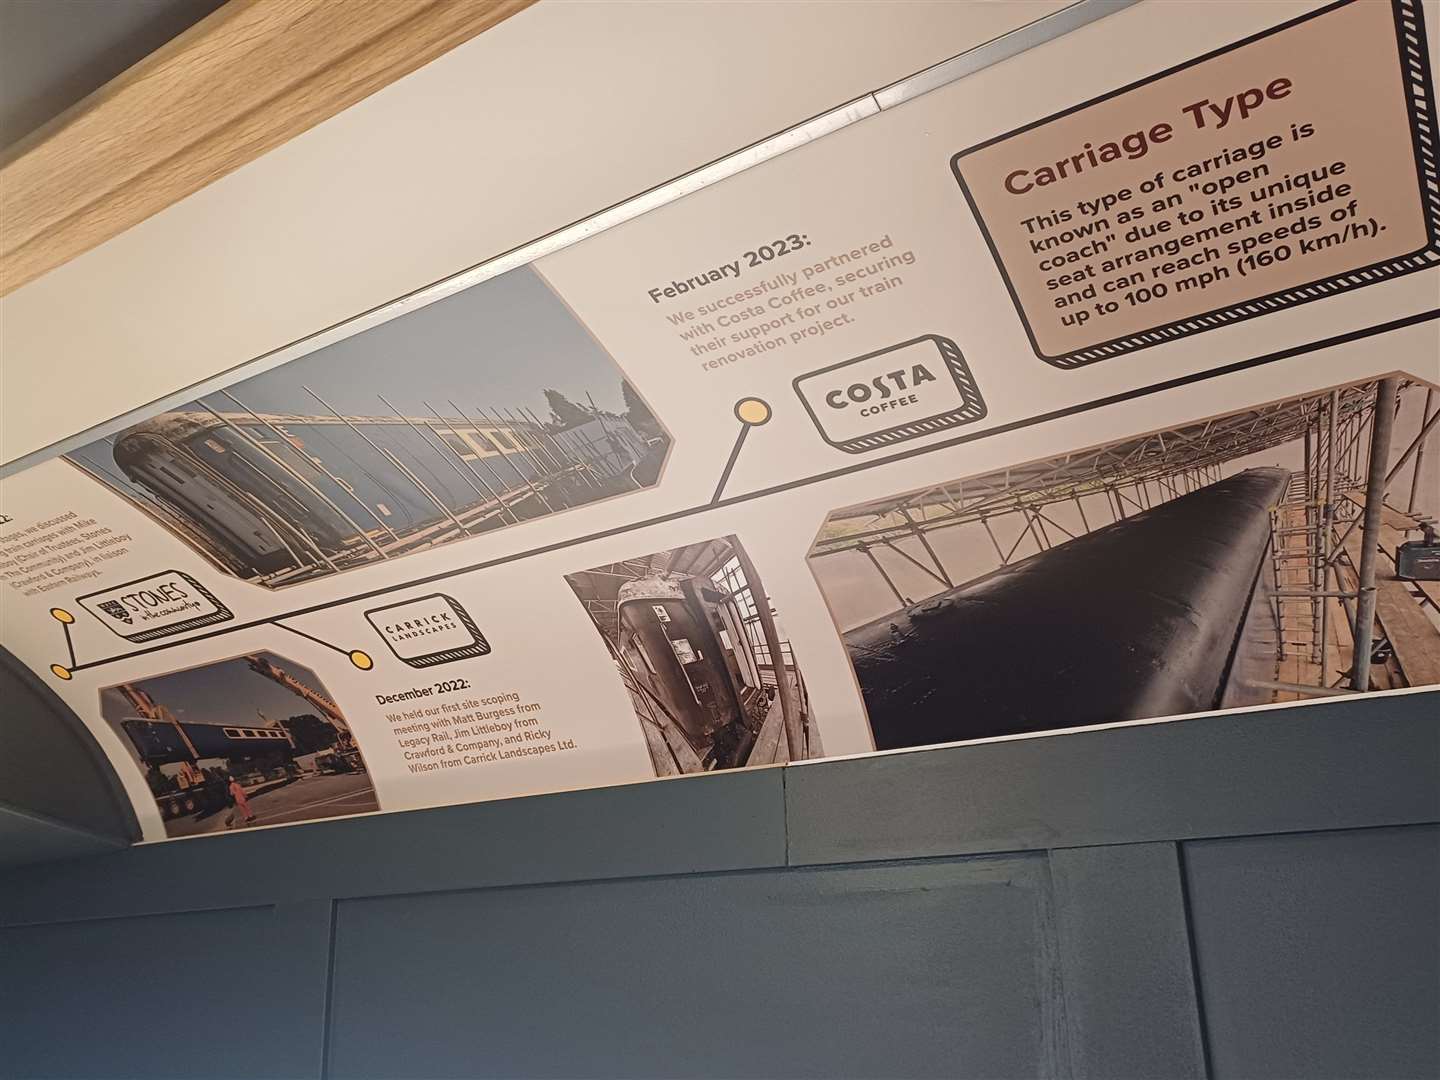 Customers will be able to read a timeline on how the train was transformed